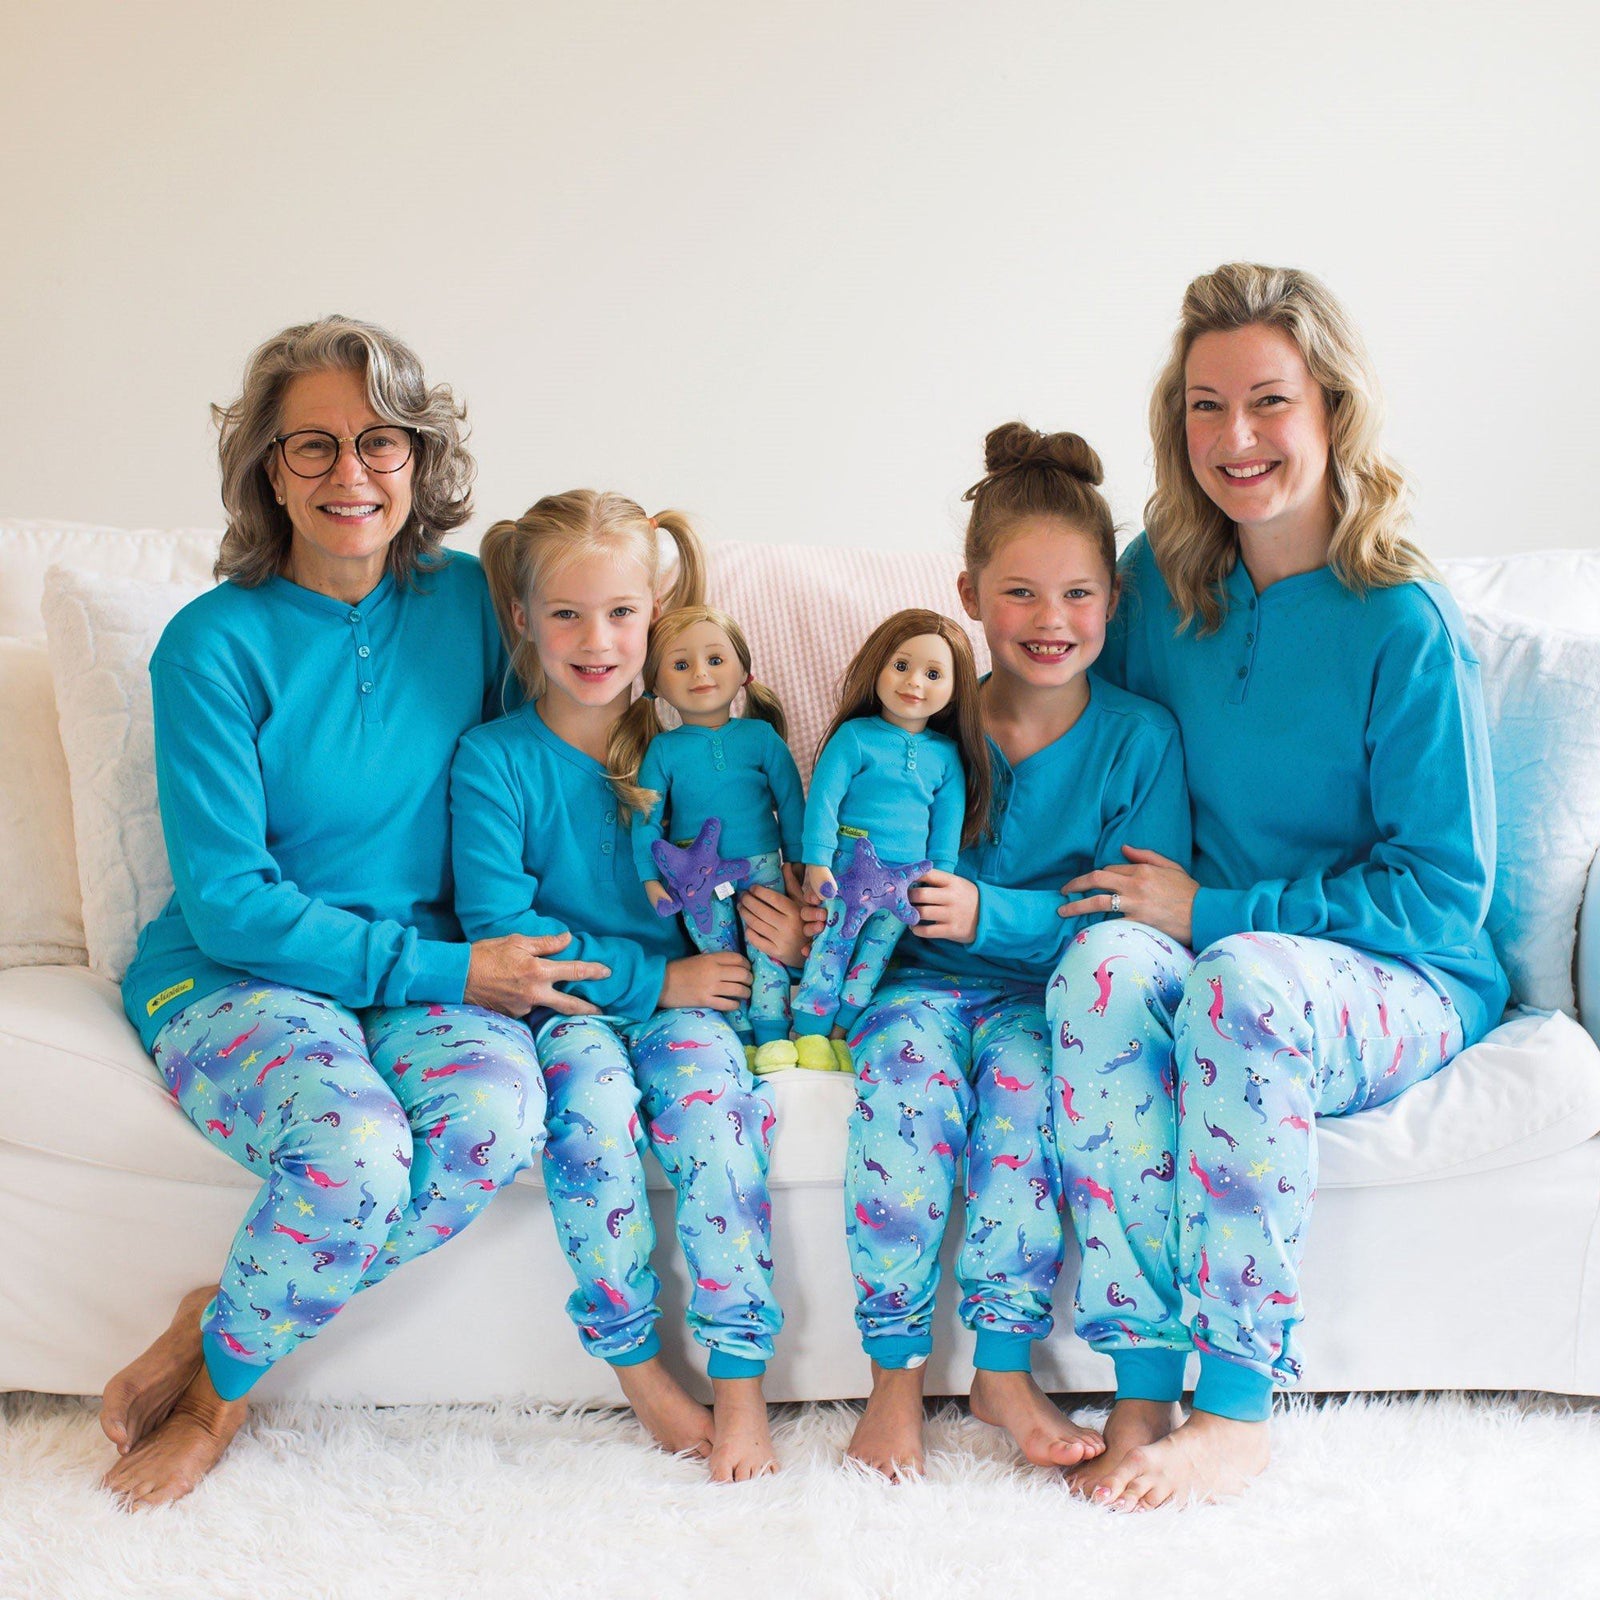 Maplelea : Matching Family PJs - The whole family can match